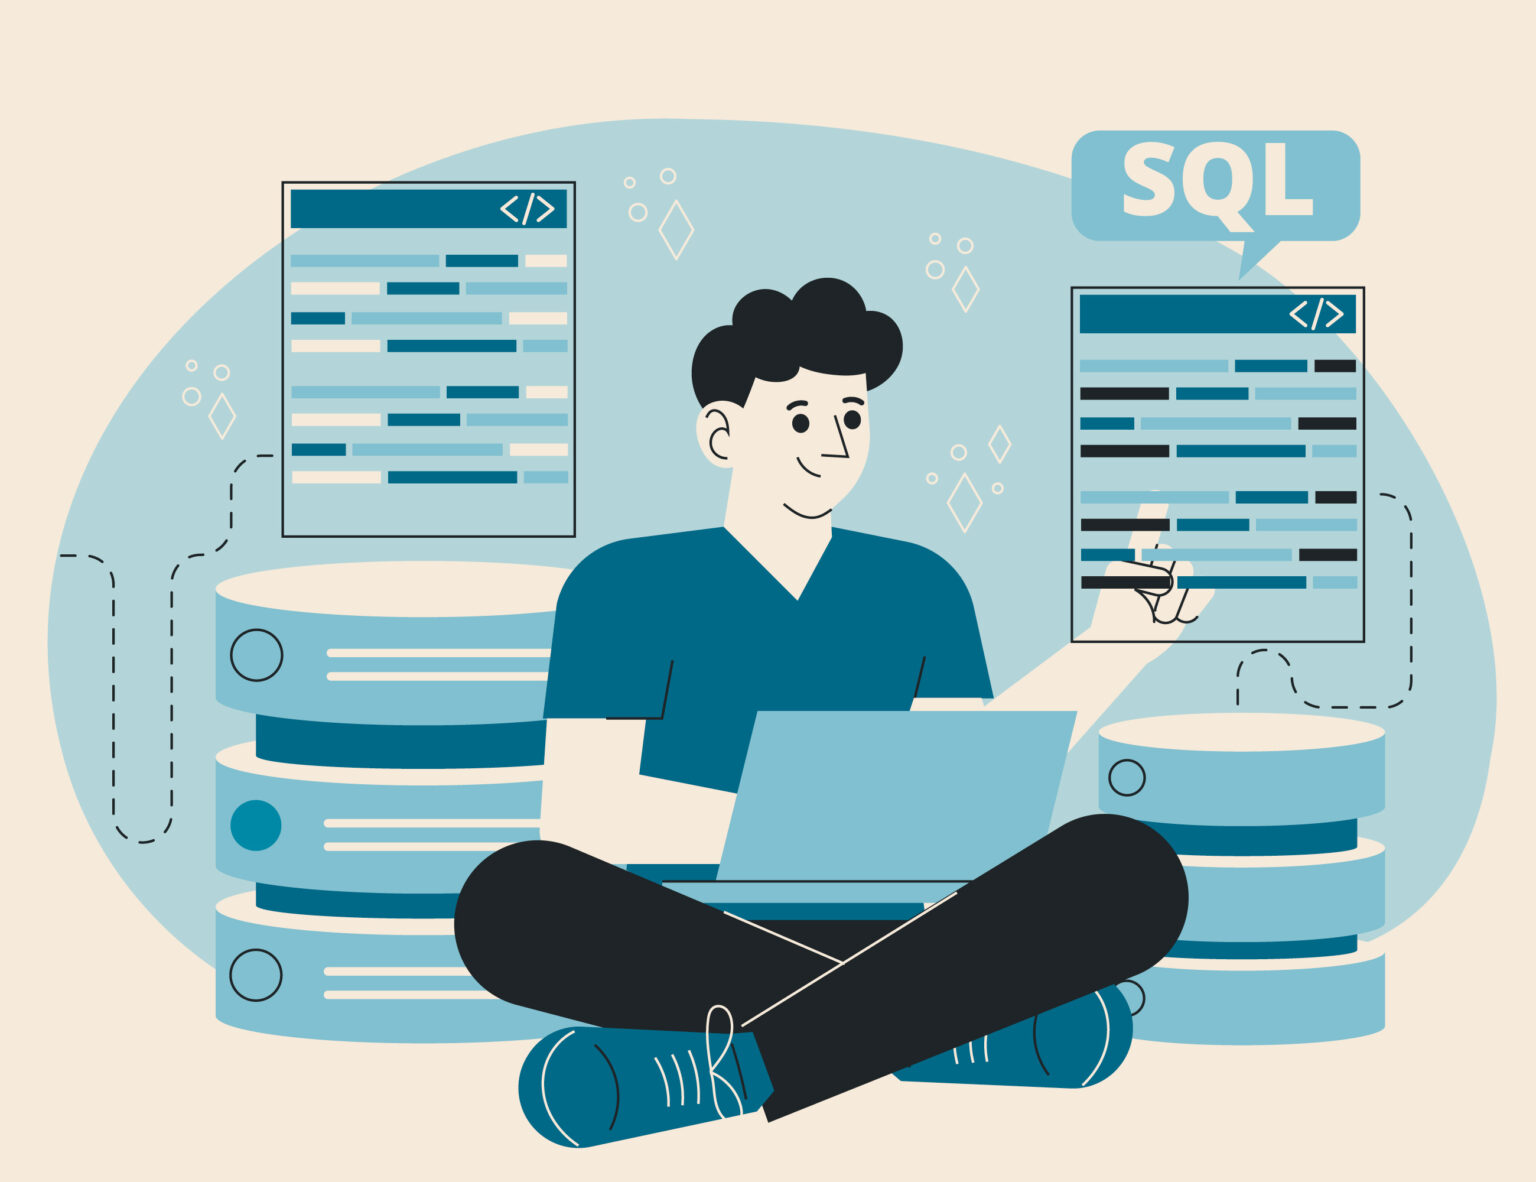 How do Microsoft SQL Server Consulting Services Reduce Server Consolidation Costs by 95%?